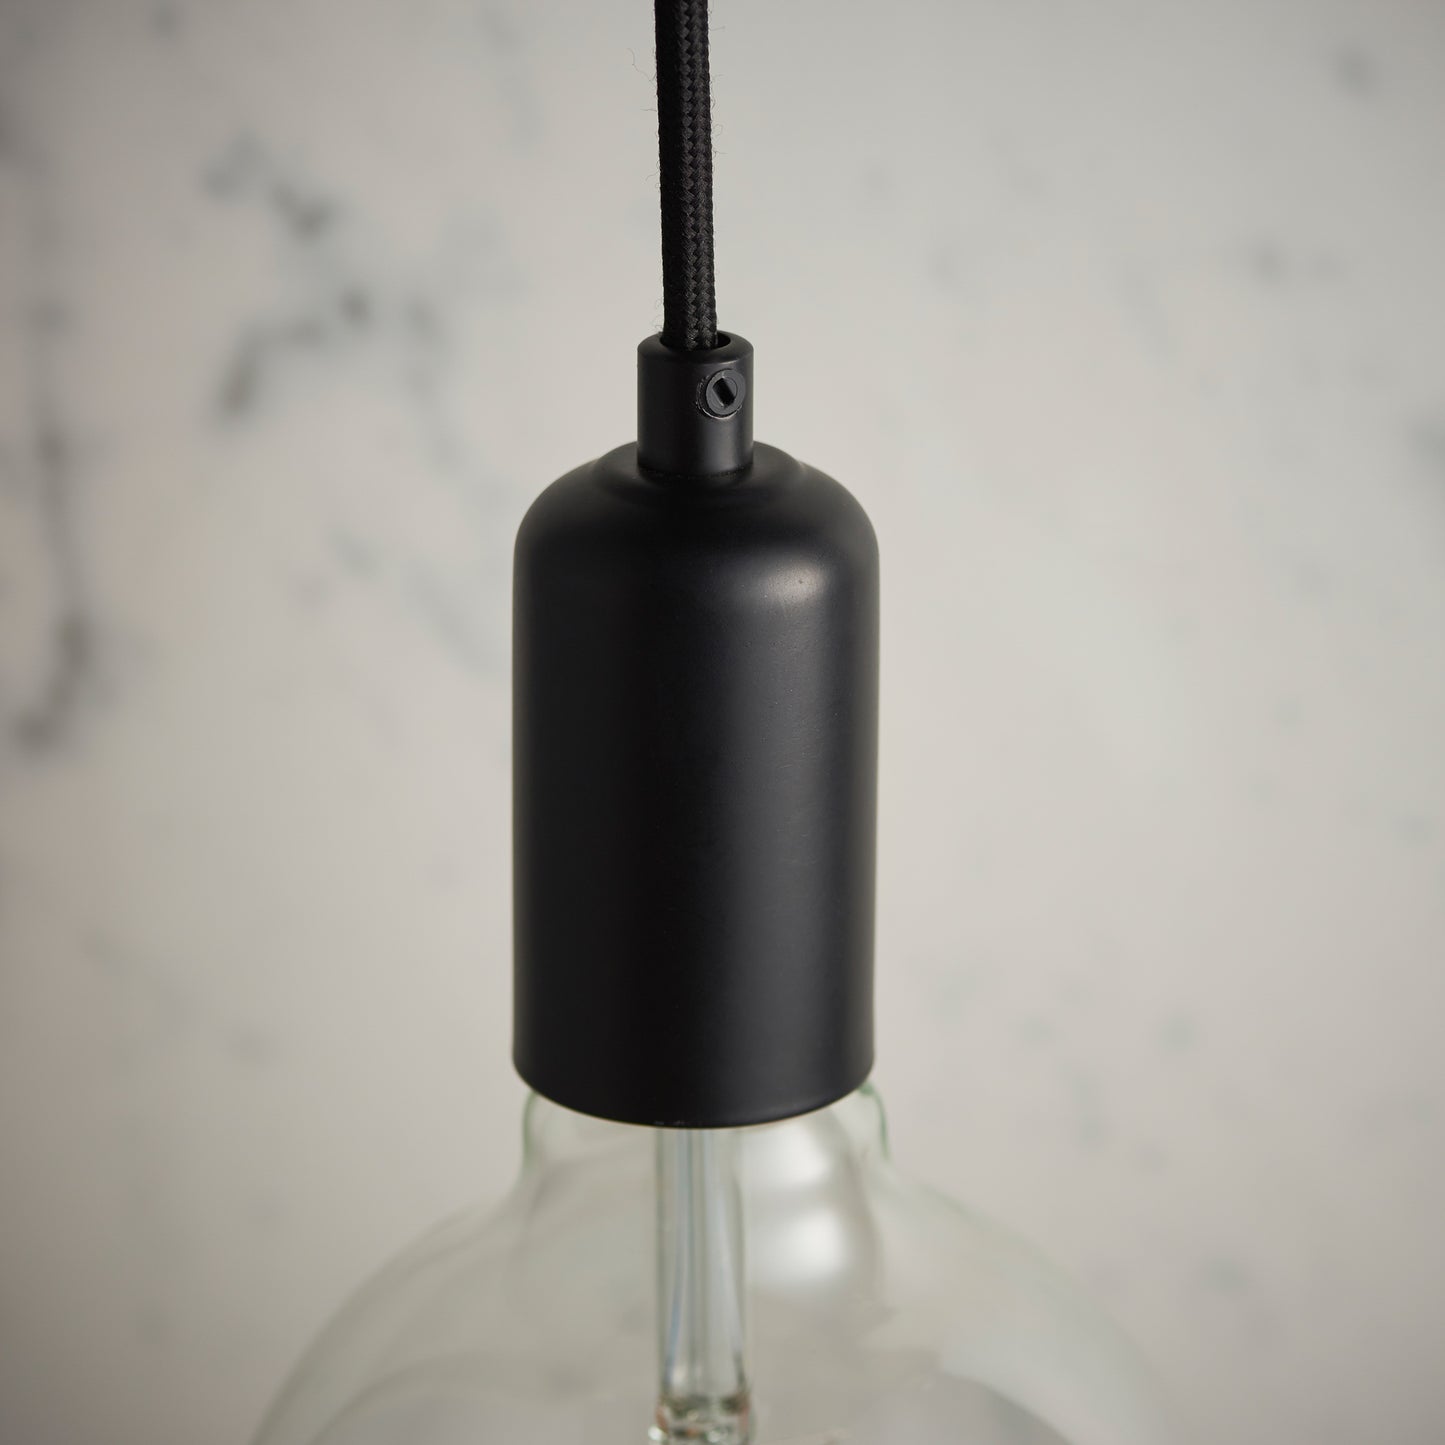 A Studio Pendant Light Matt Black hanging on a marble countertop, perfect for interior decor and home furniture enthusiasts from Kikiathome.co.uk.